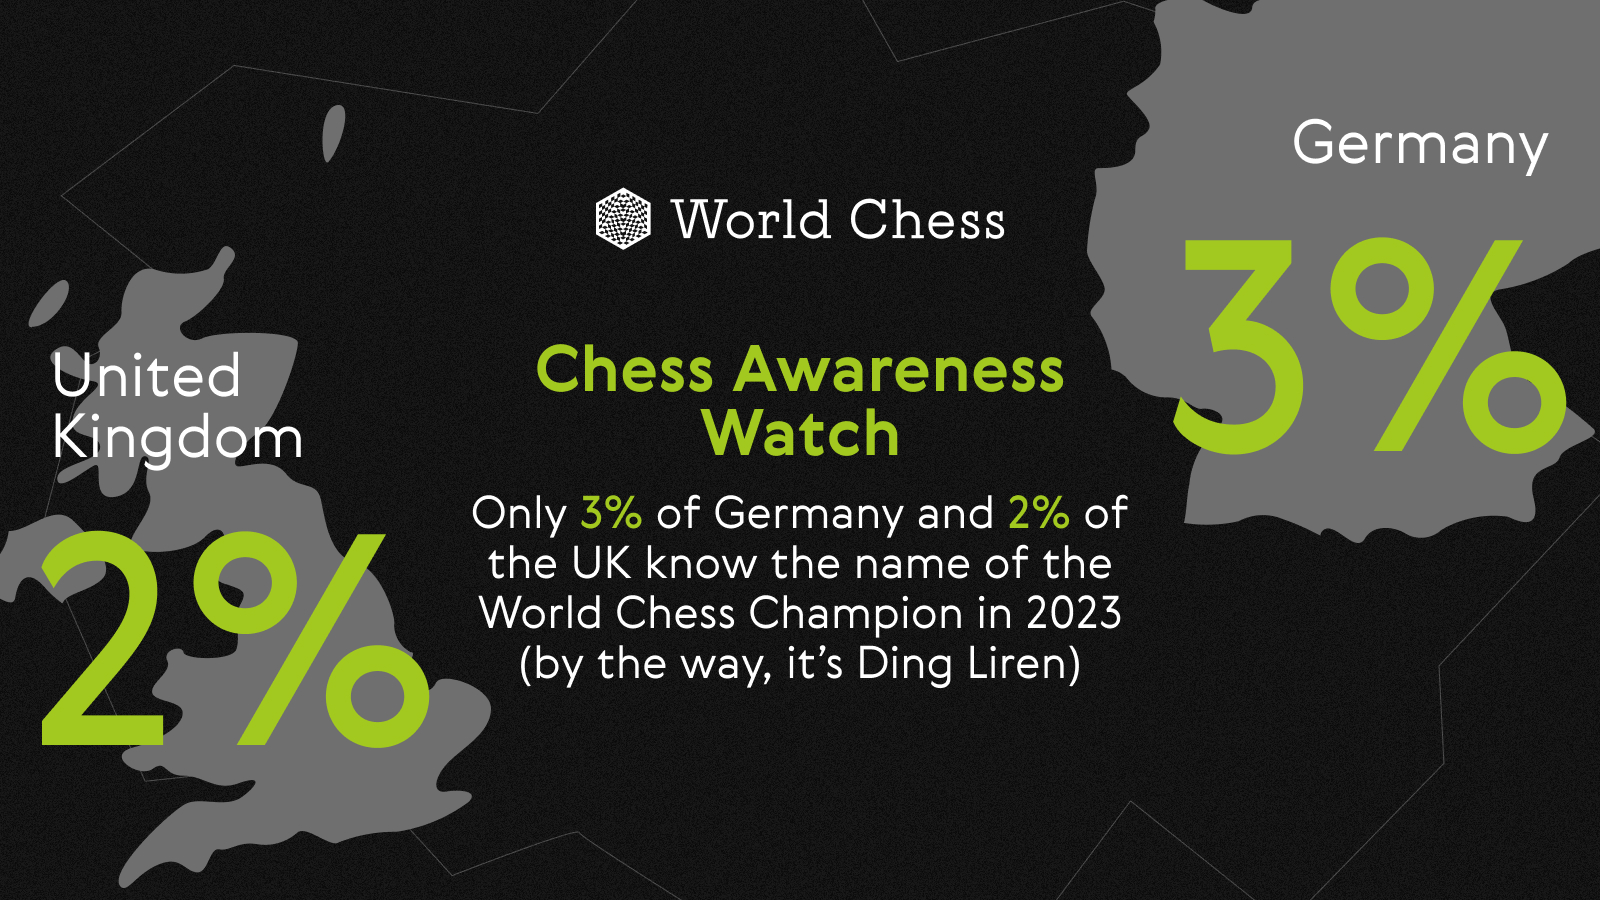 2700chess on X: We're pleased to announce our beta testing collaboration  with @worldchess, FIDE's commercial partner and @fideonlinearena, the  official gaming platform. You can find official FIDE Online Arena ratings  under the